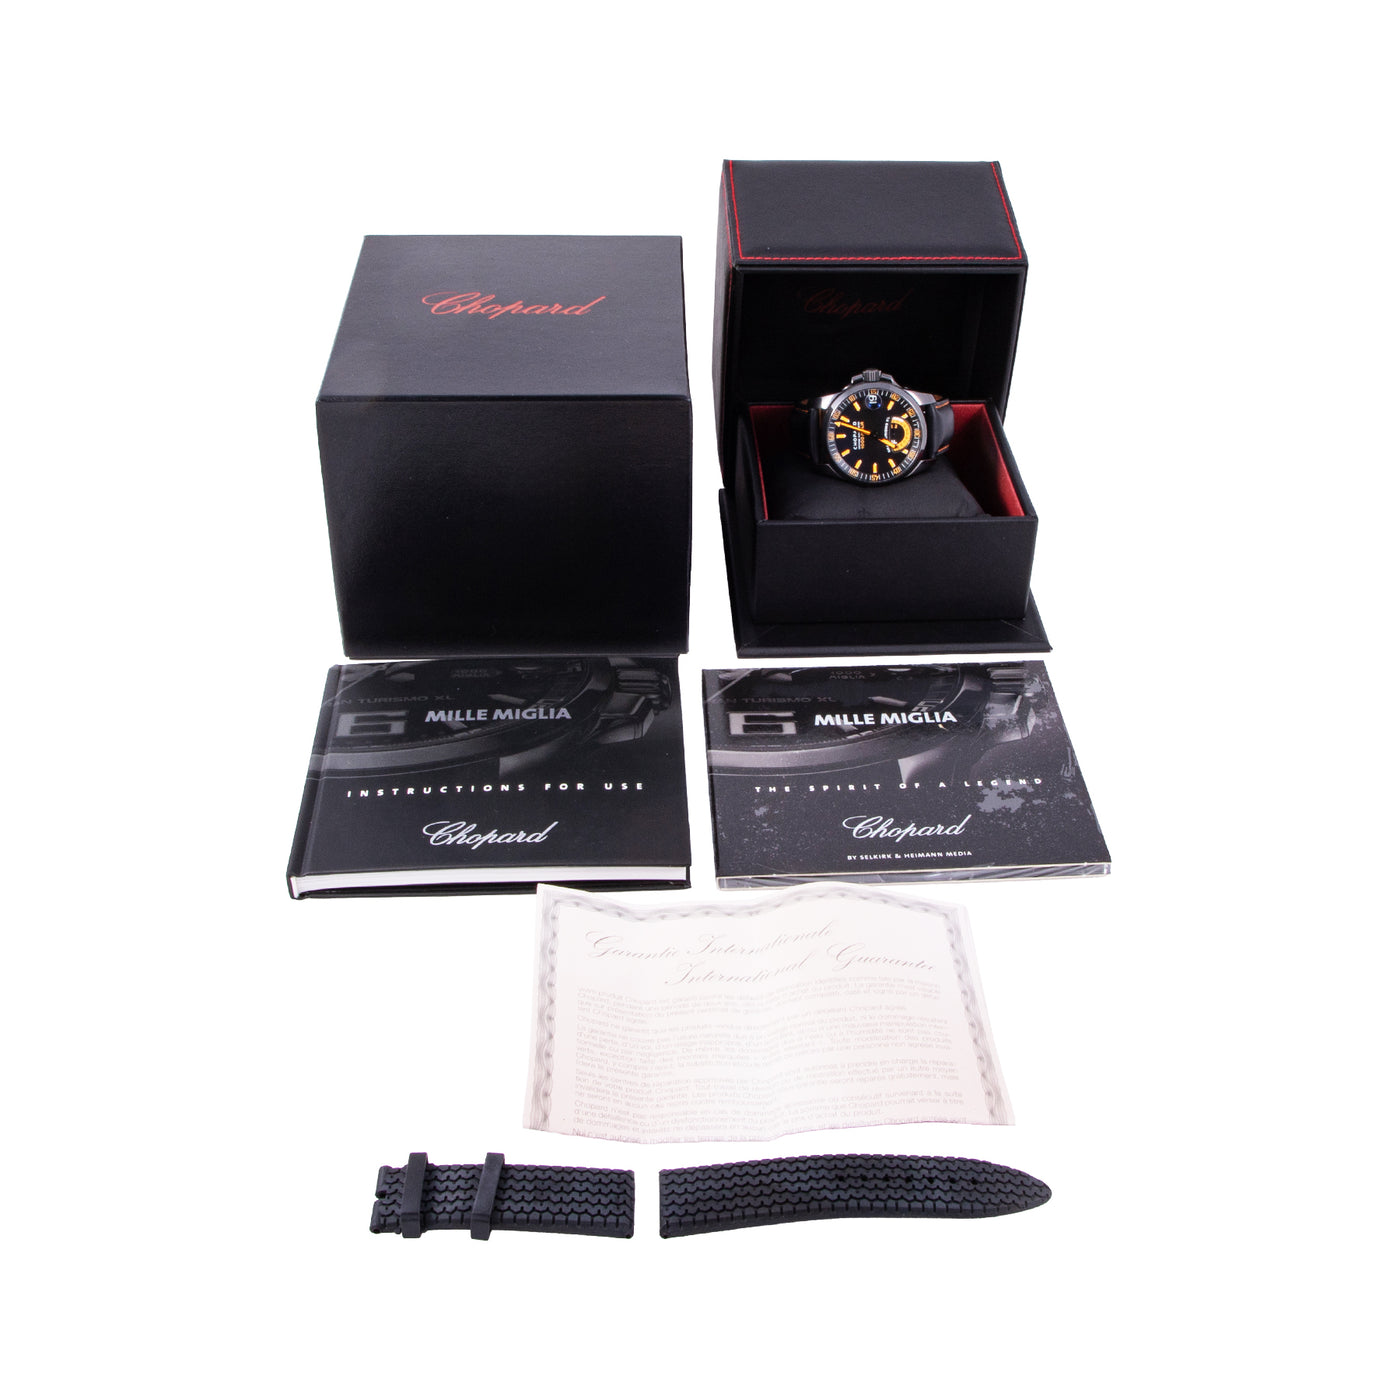 Chopard Gran Turismo XL in PVD Limited Edition 8997 full set | TImepiece360